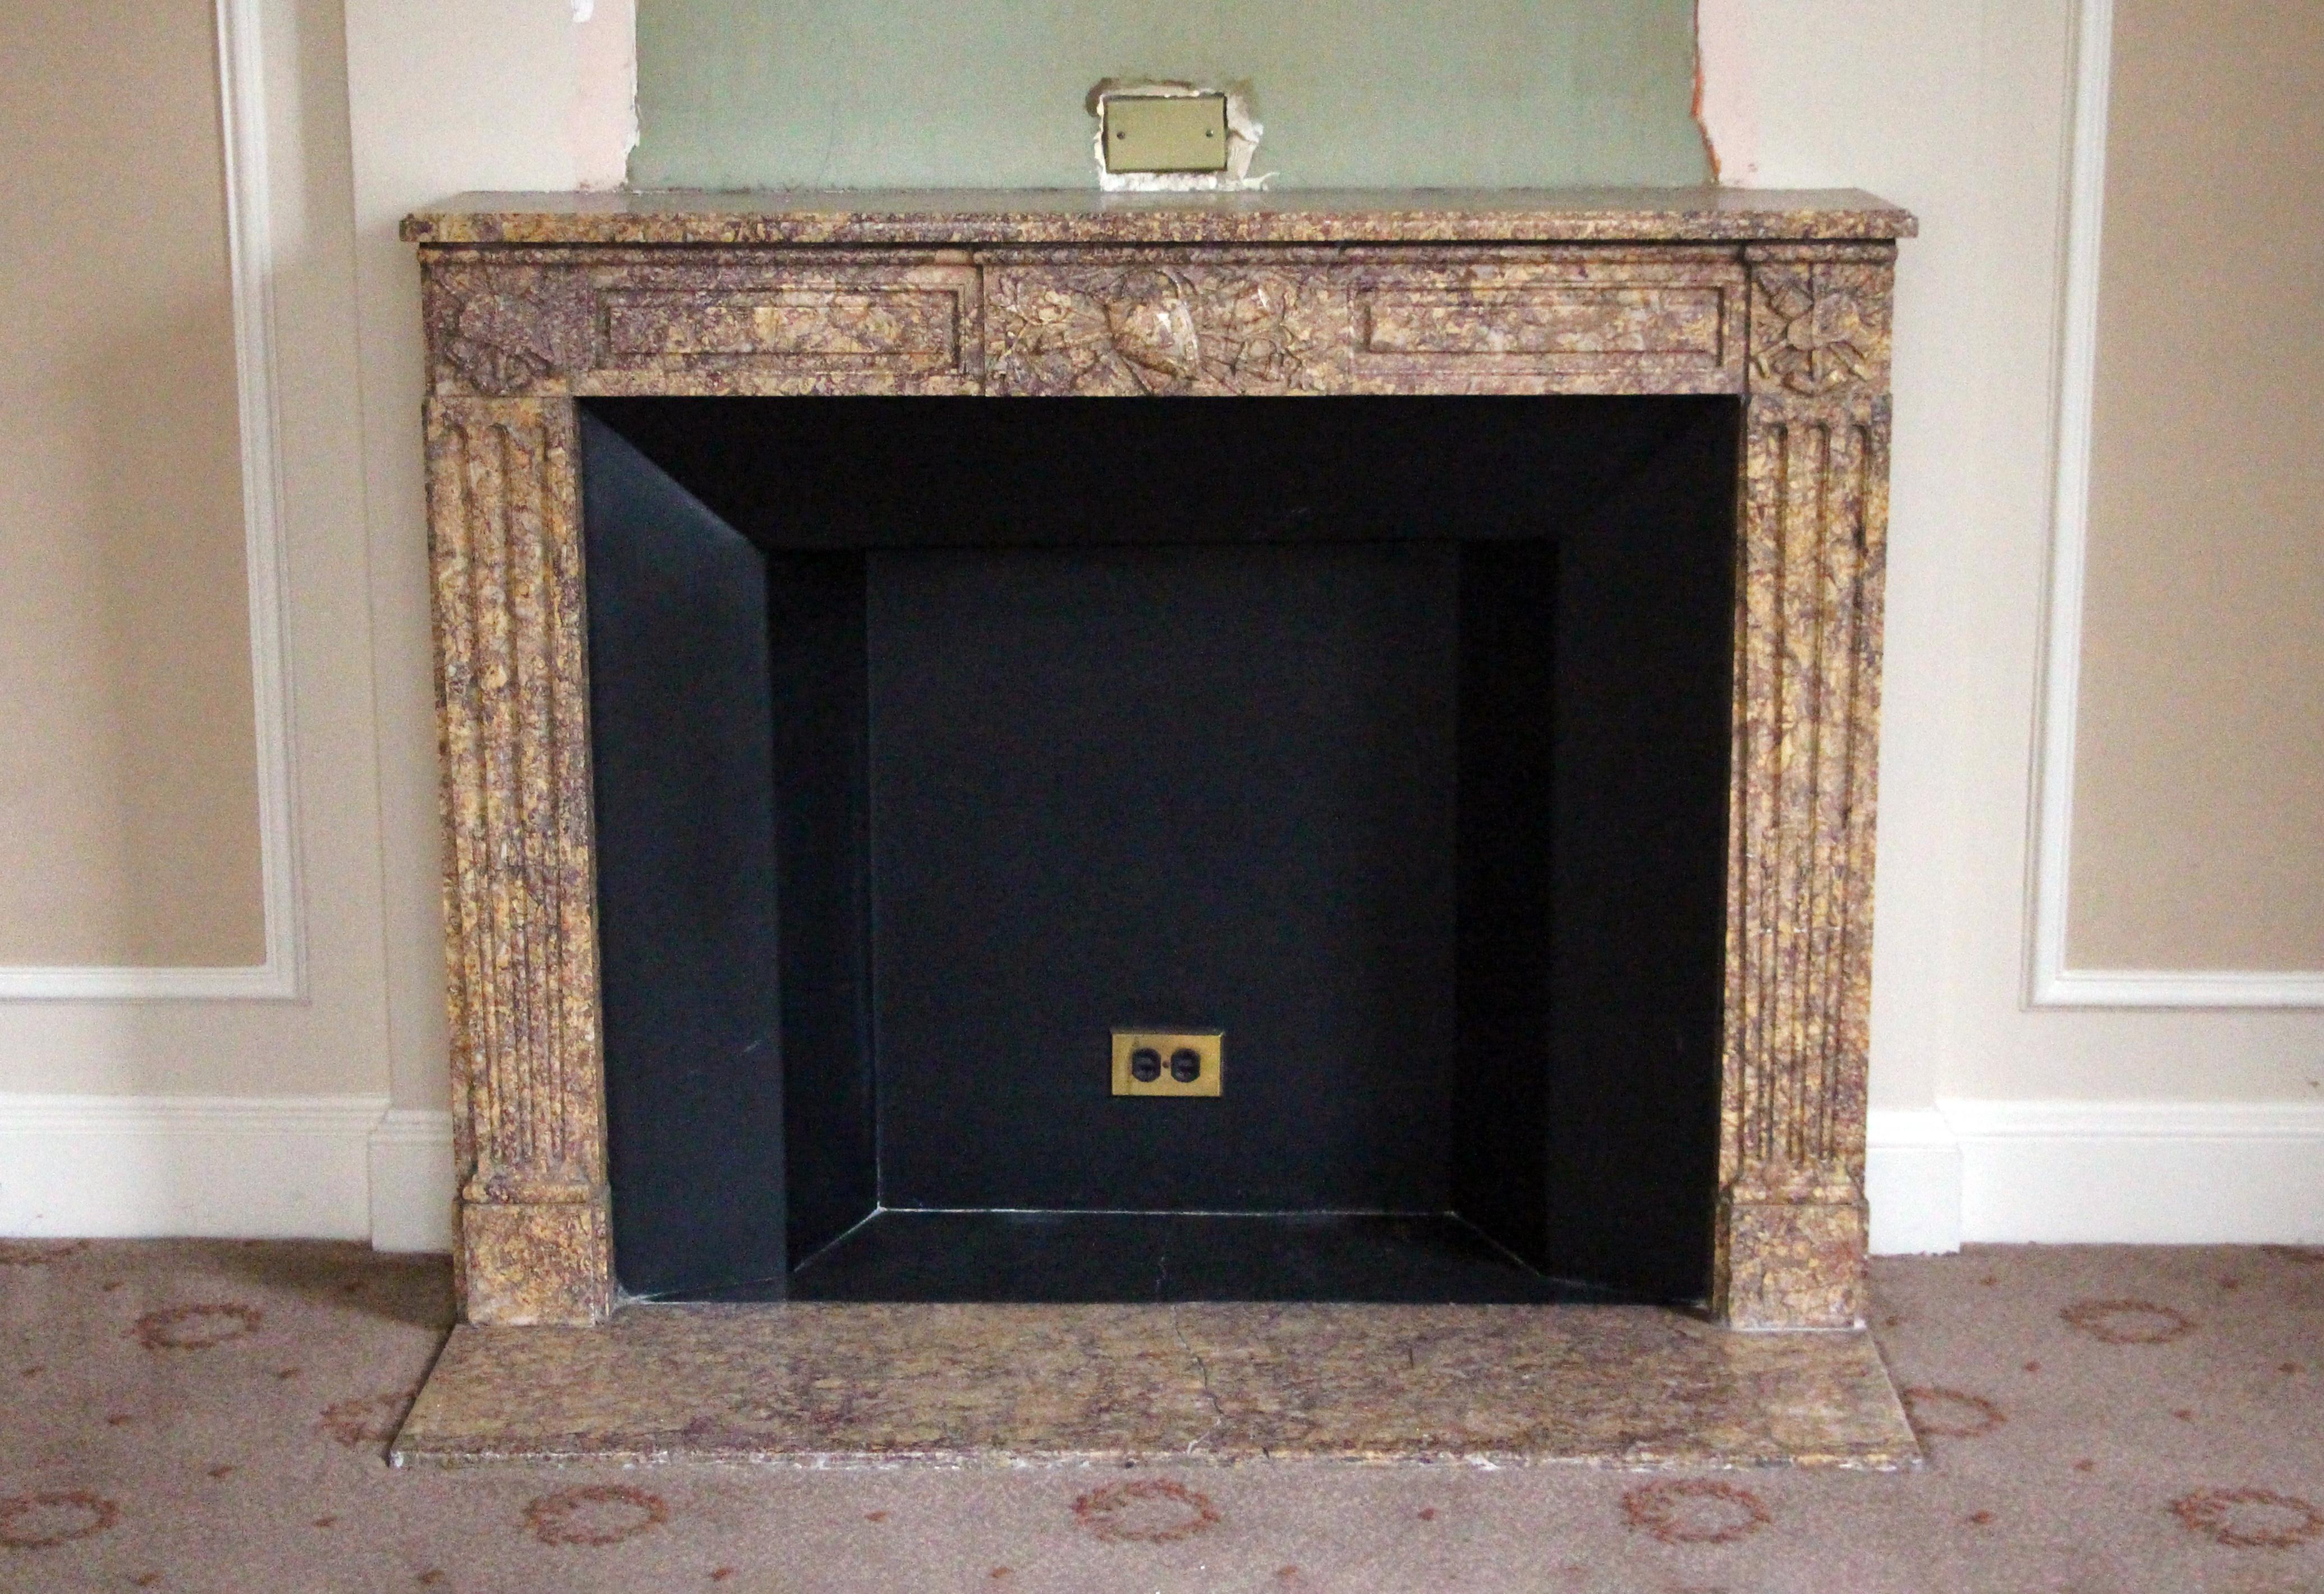 Hearth not included. This mantel, original to the M Suite on the 28th Floor of the Waldorf Astoria Towers is carved in a Louis XVI Regency style from earth tone brown marble. Floral and fluted column details enhance the beauty of this simple yet